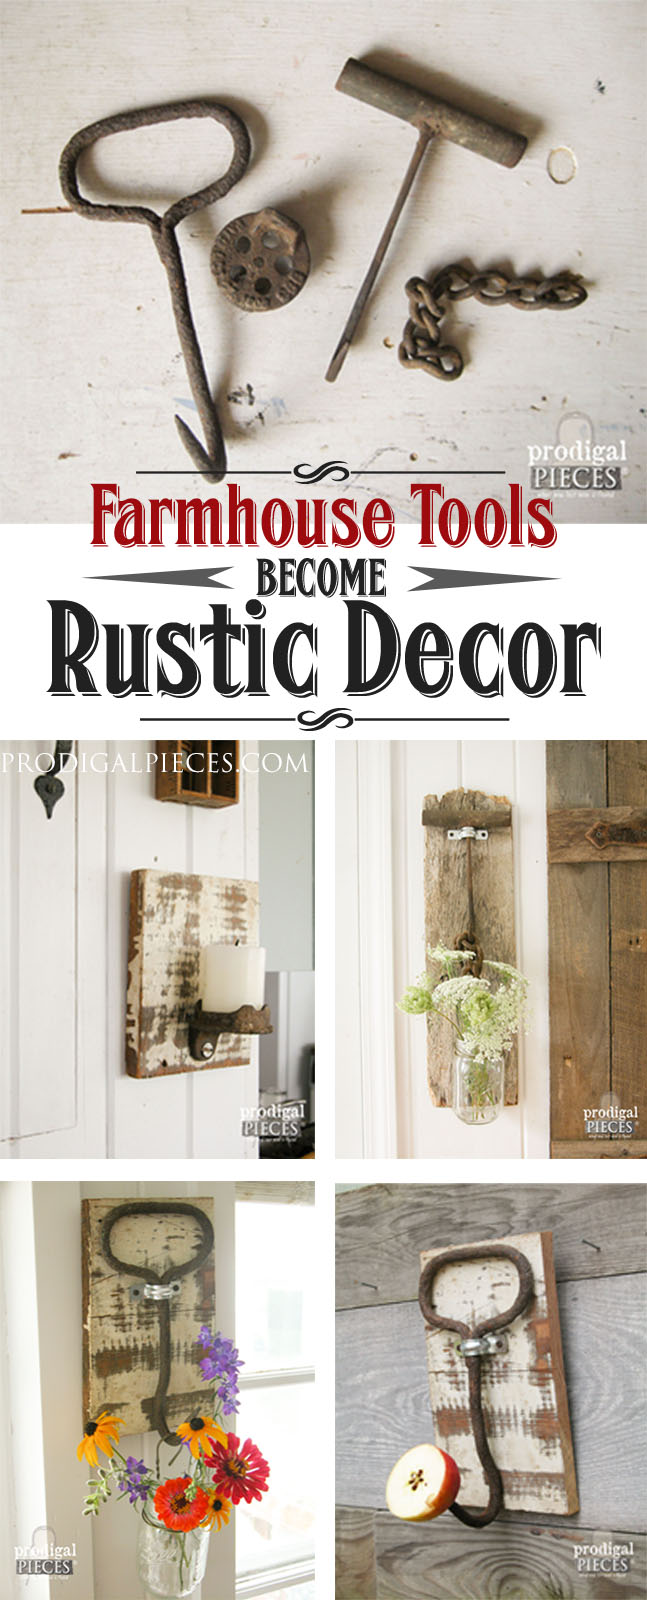 Rusty old farmhouse tools are perfect paired with reclaimed barn wood to make functional decor. Just grab a hanger, Ball jar, and a DIY attitude. by Prodigal Pieces www.prodigalpieces.com #prodigalpieces